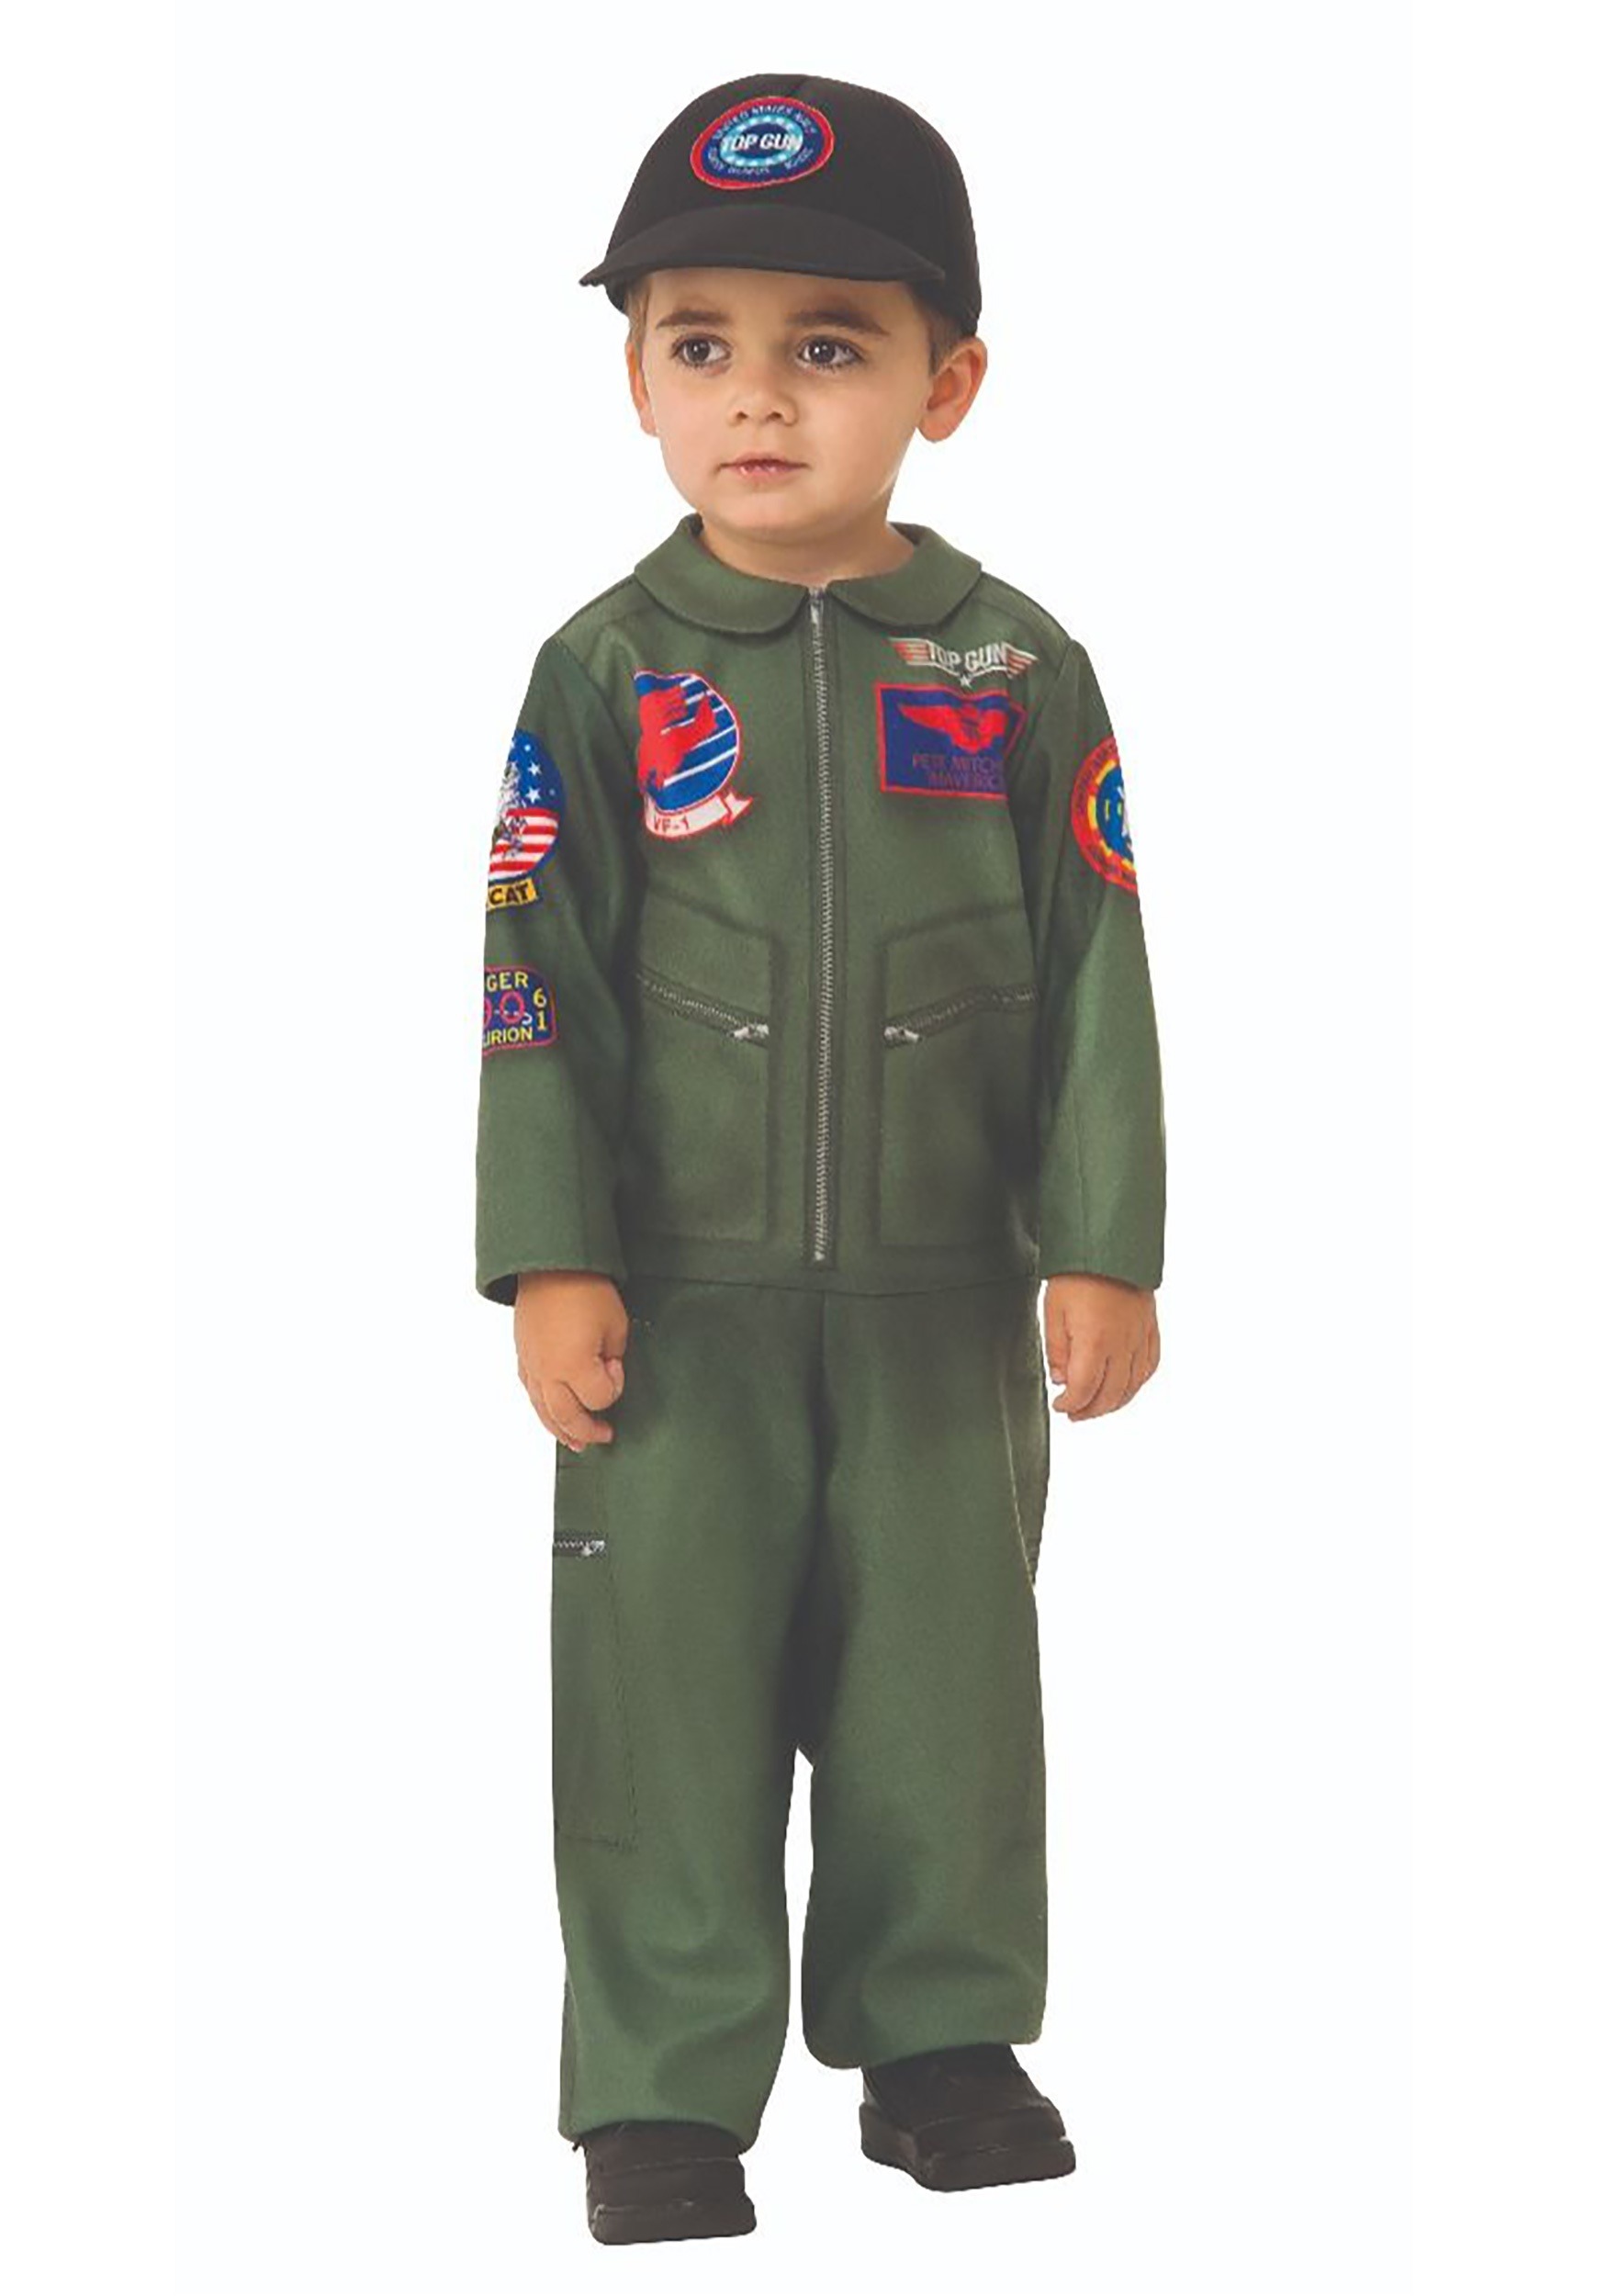 Top Gun Jumpsuit Costume for Toddlers